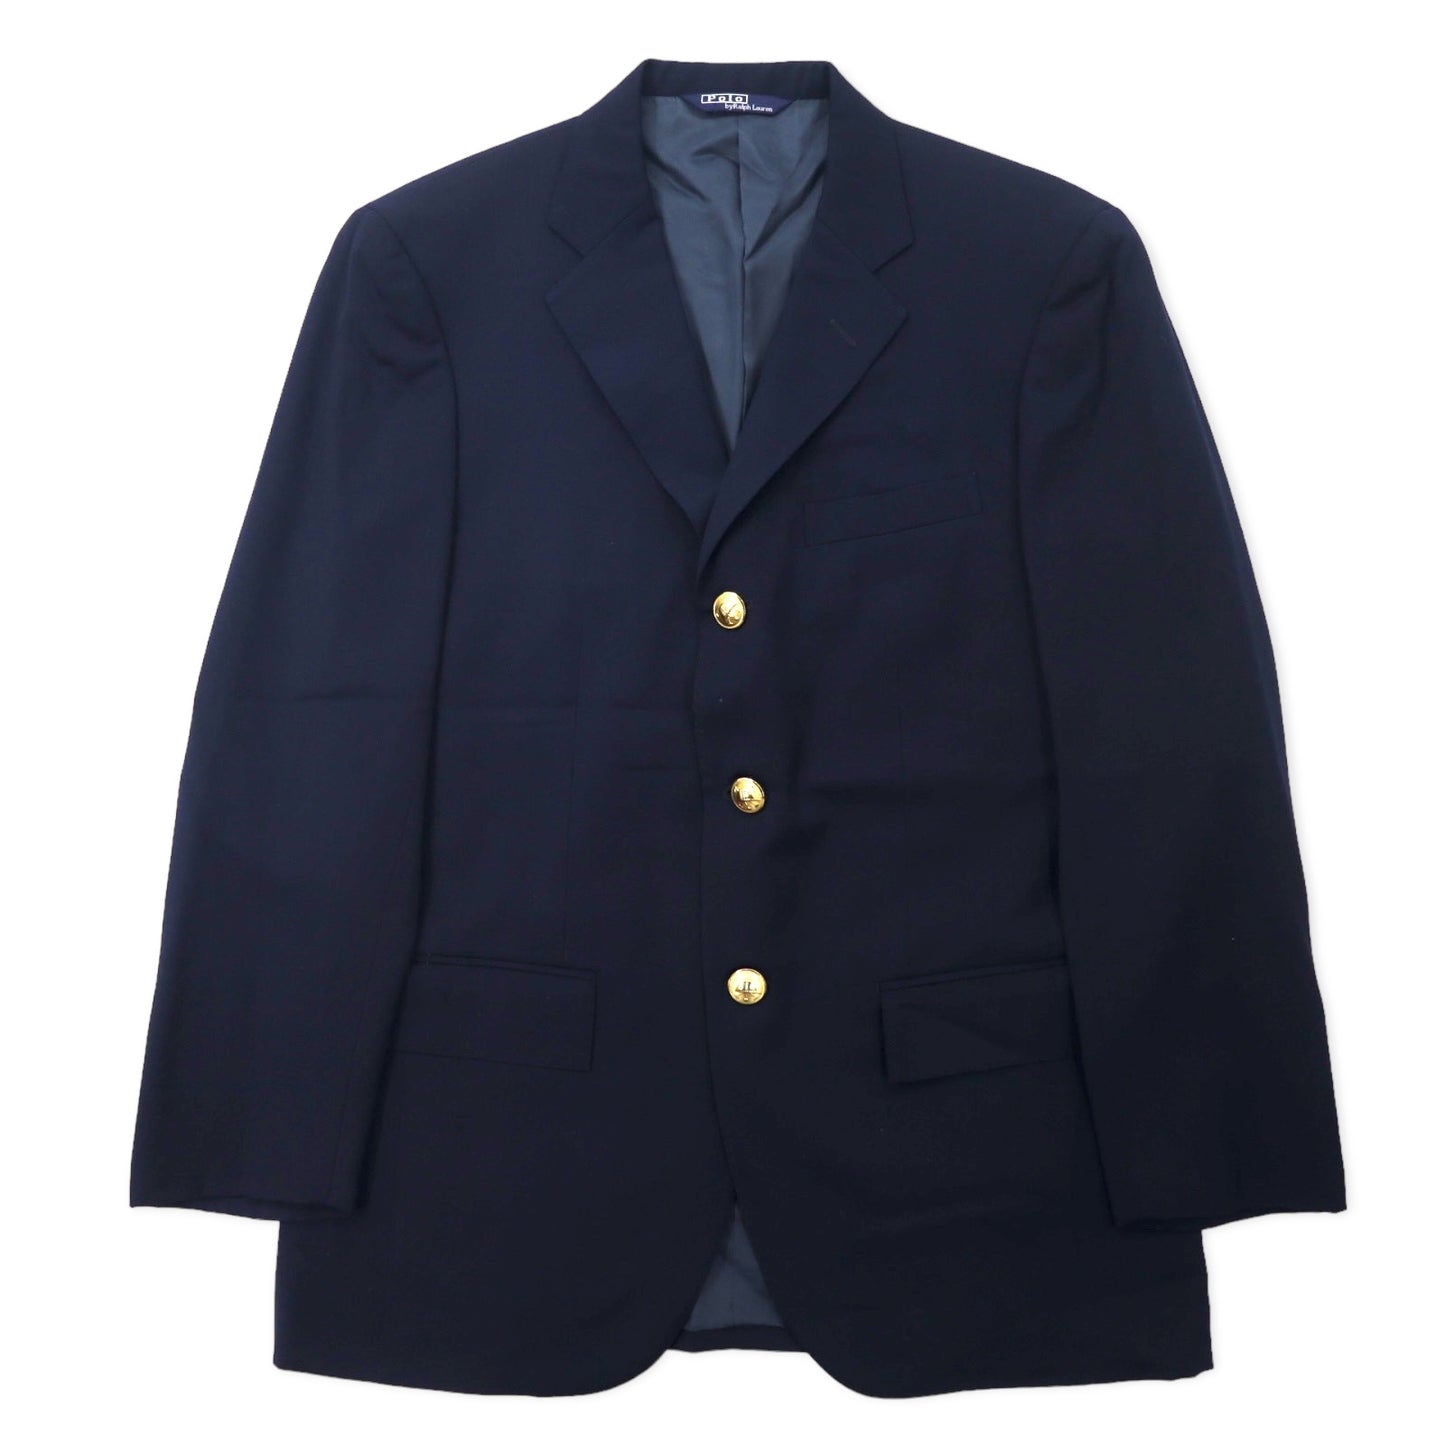 POLO BY RALPH LAUREN 3B Tailored Jacket Navy Blue 96-86-175 AB6